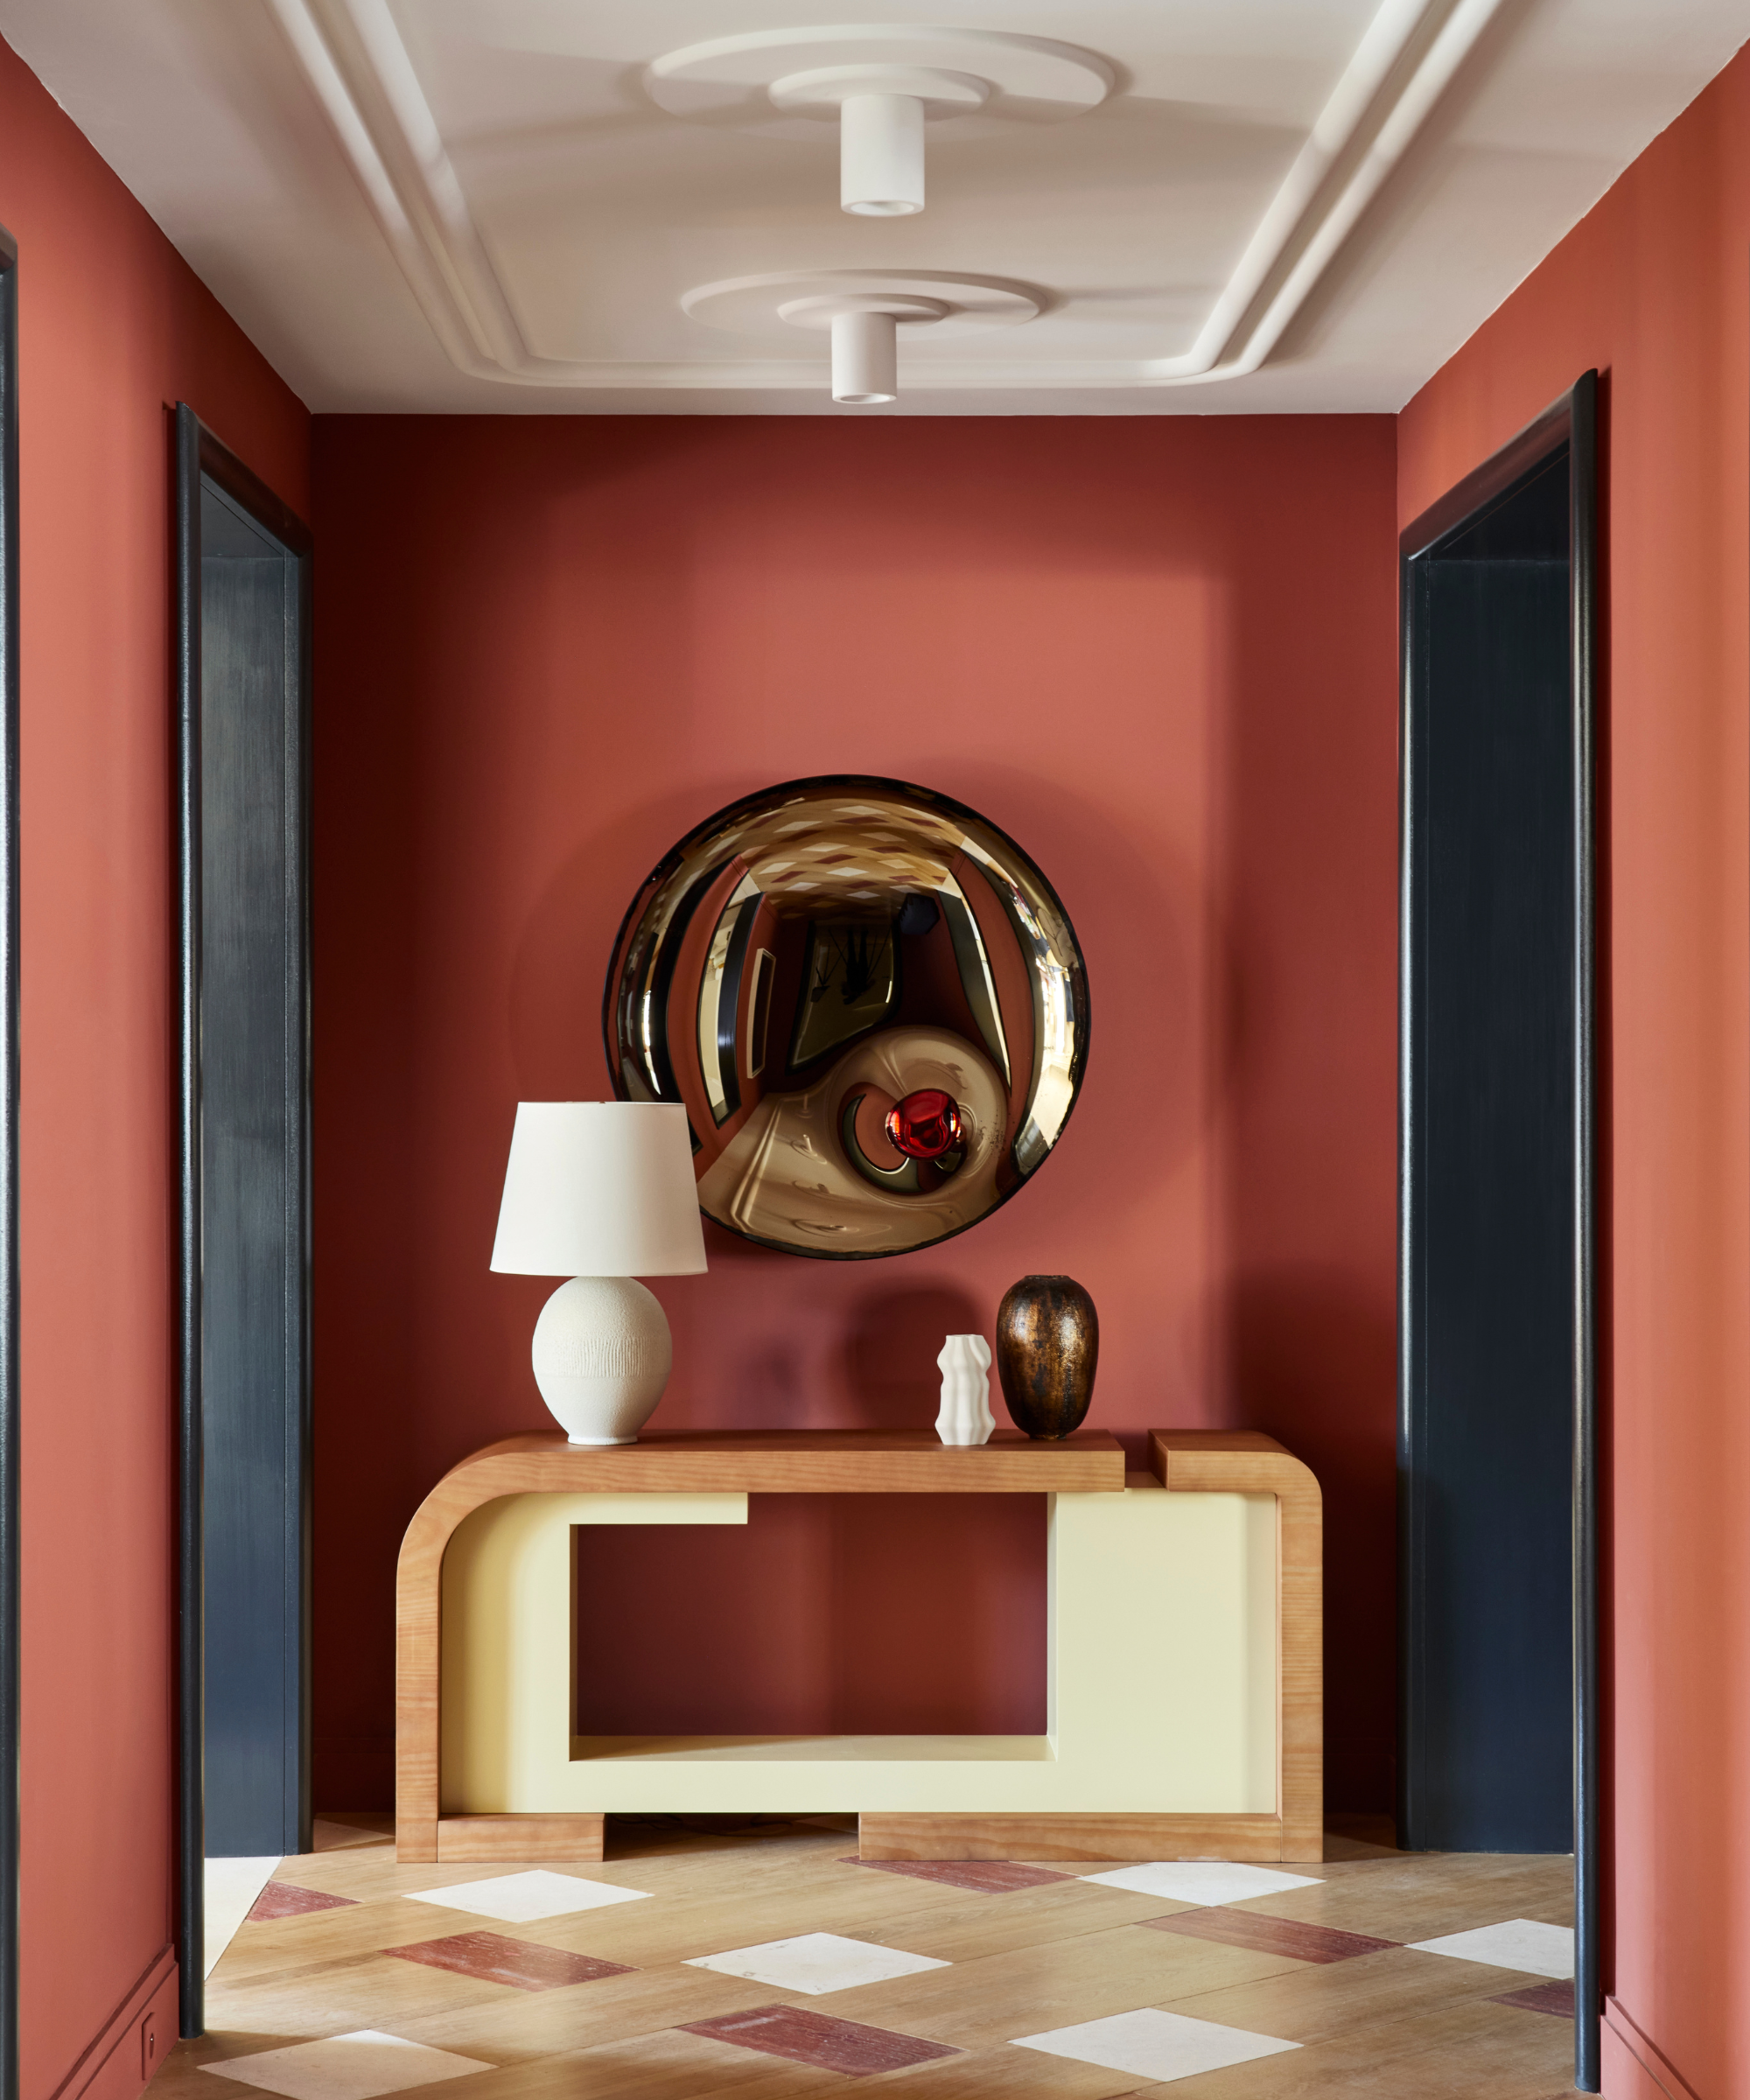 Warm red tone walls and tile floor in hallway with round mirror and black door frames to punctuate the space